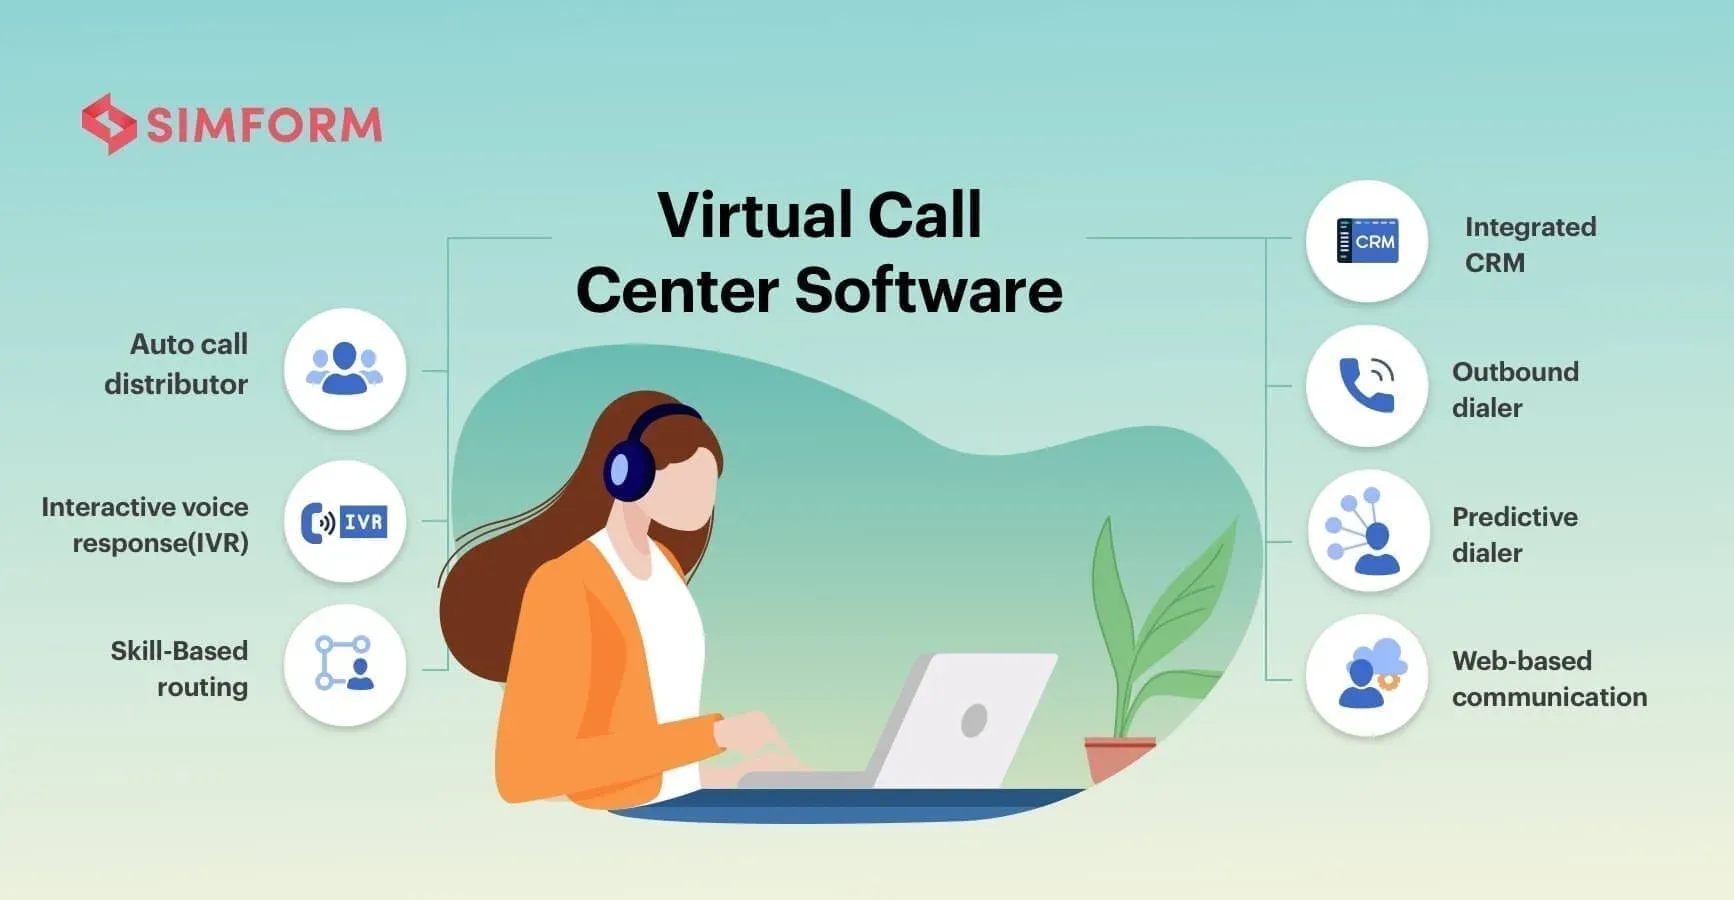 What are Virtual Call Centers?